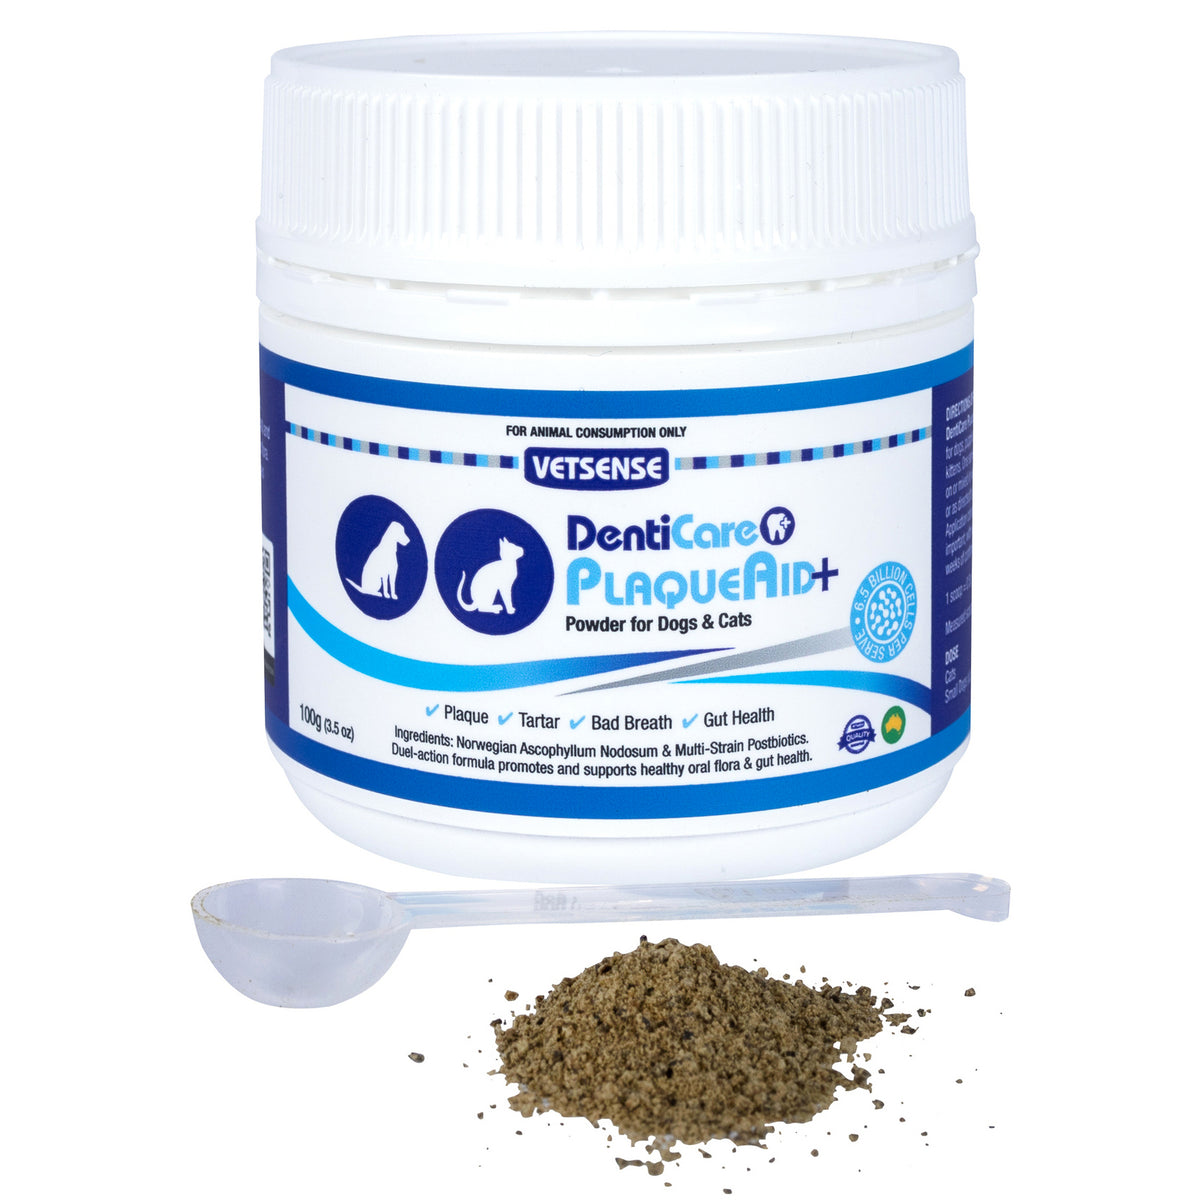 Vetsense DentiCare PlaqueAid+ Powder for Dogs &amp; Cats